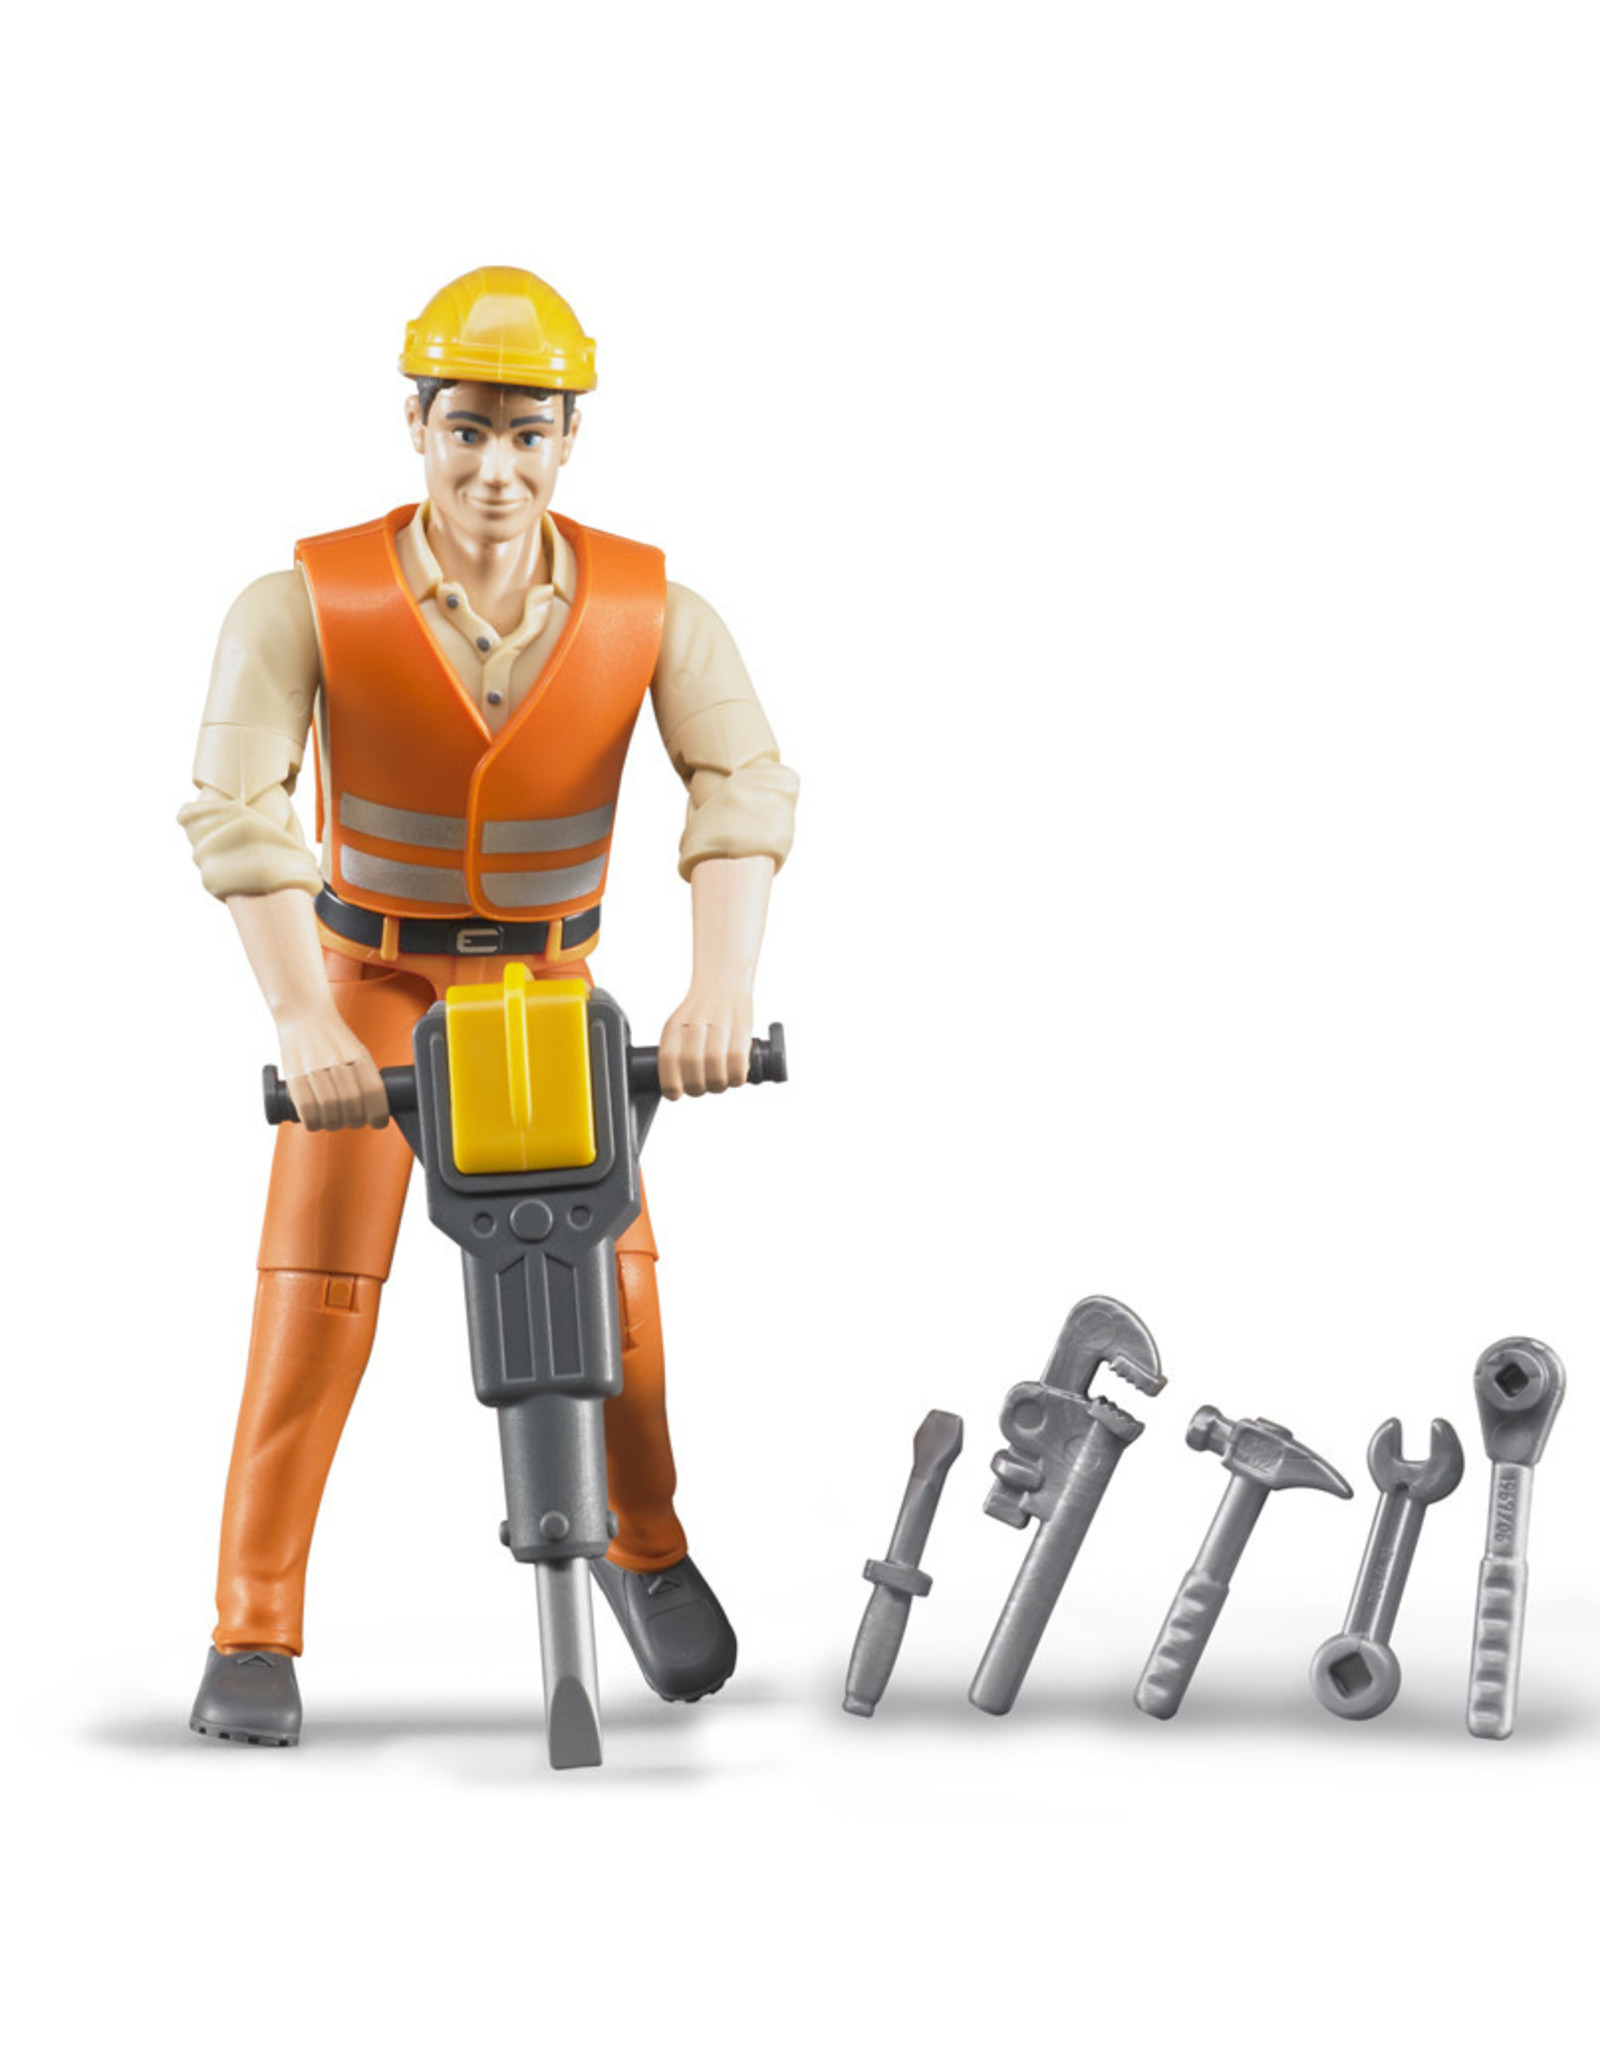 BRUDER TOYS AMERICA INC CONSTRUCTION WORKER